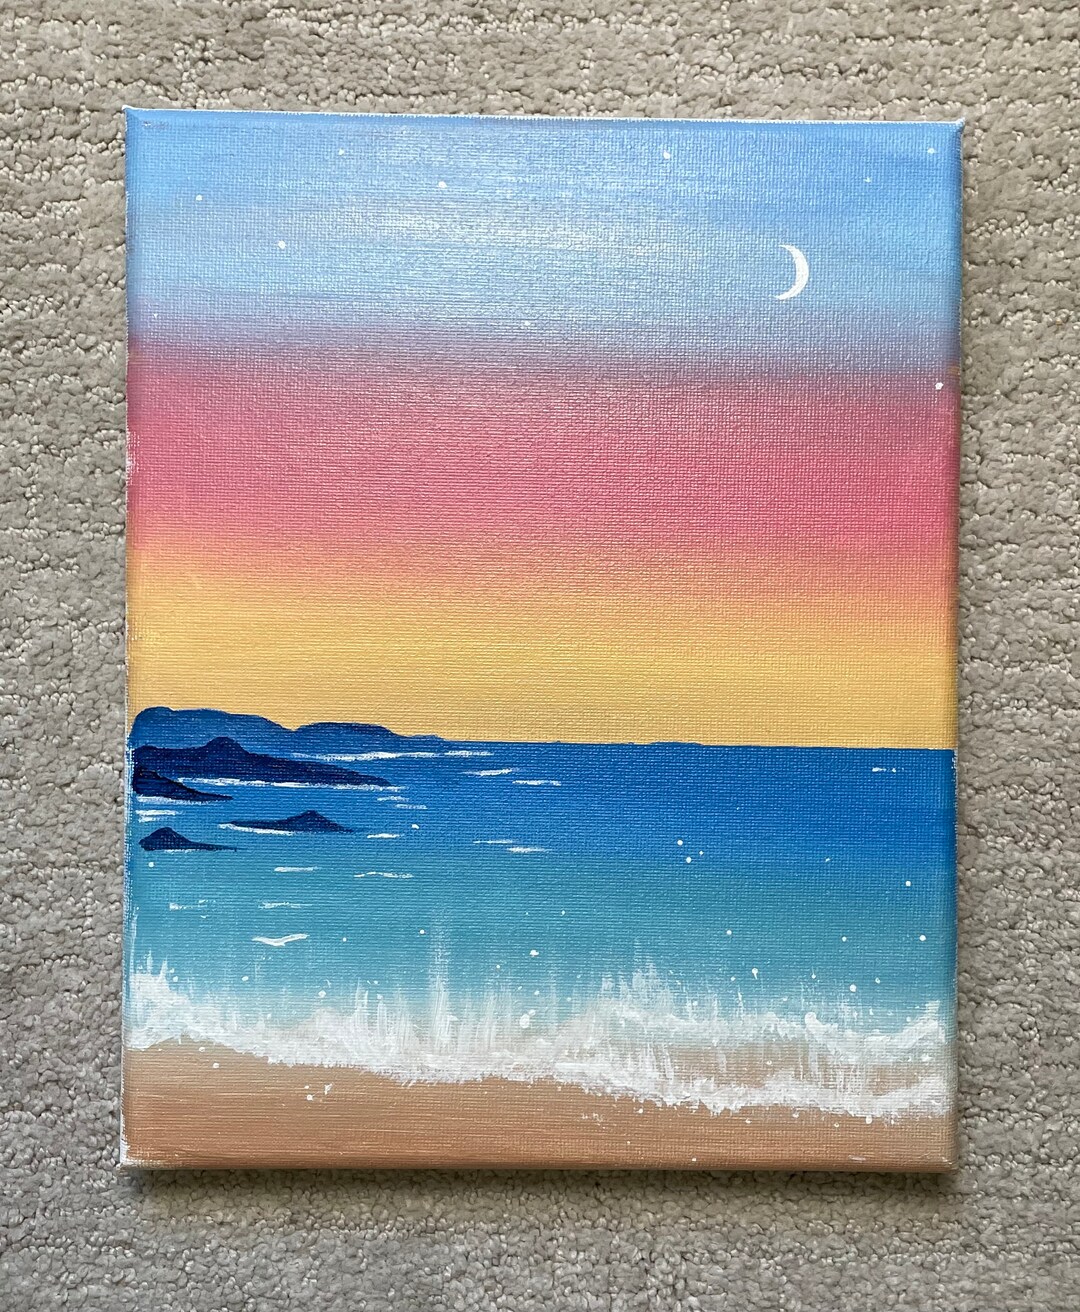 Sunset Cliffs A Hand Painted Acrylic Landscape on 8x10 Stretched Canvas ...